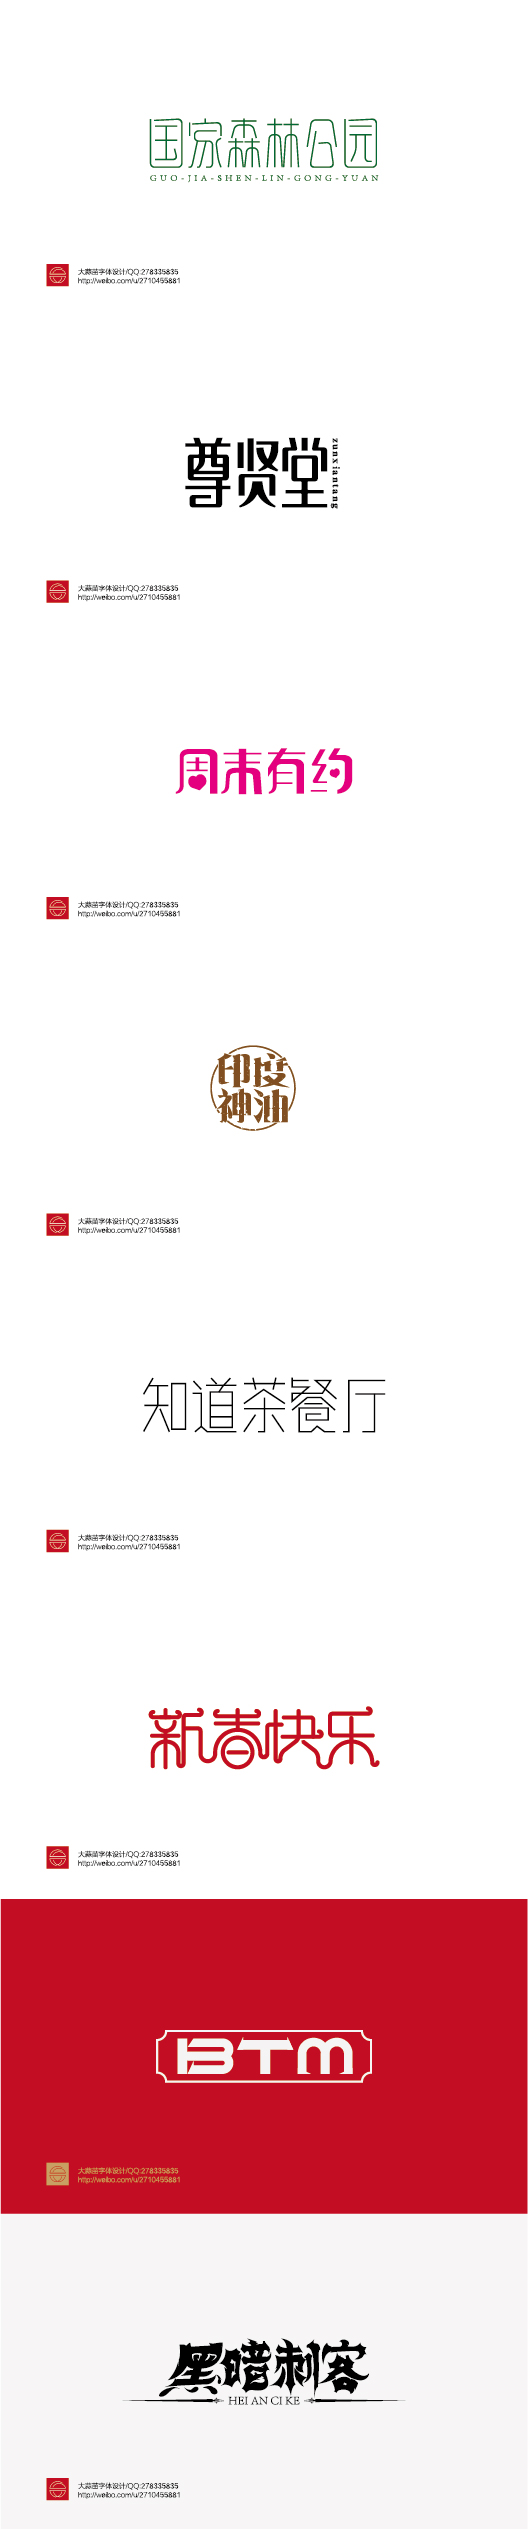 88+ Old Looking Examples of Vintage Chinese Font Logo Designs